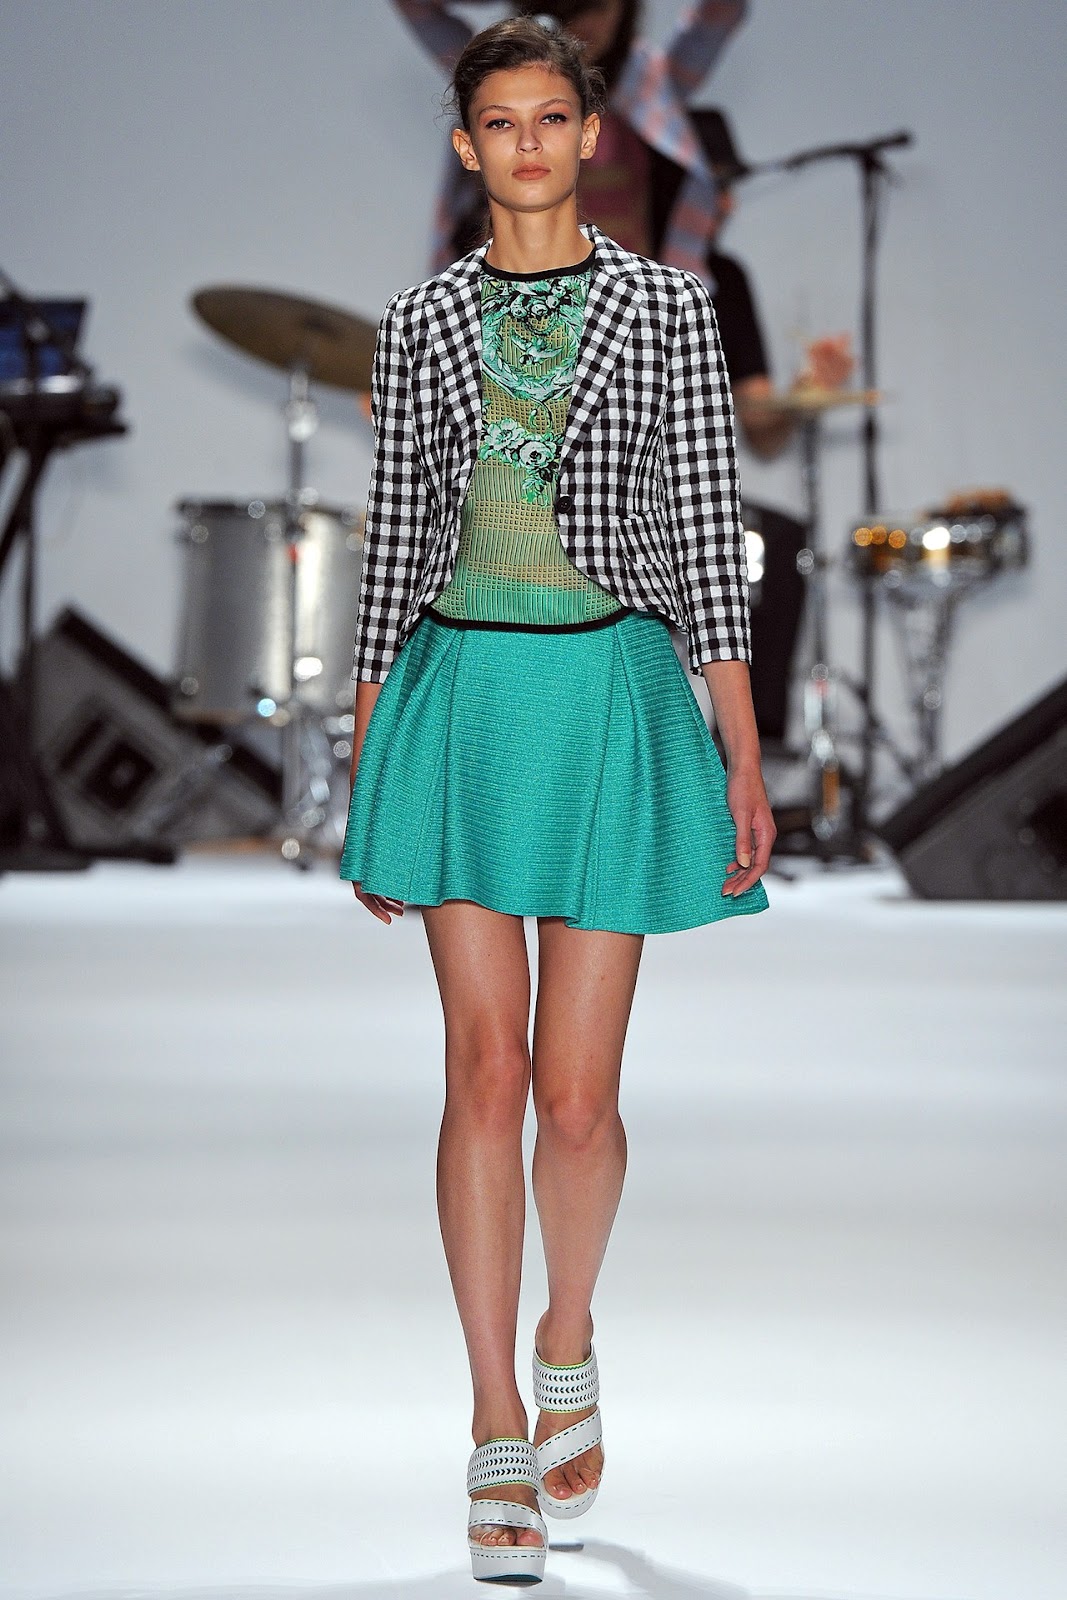 Nanette Lepore Spring 2013 - Mixing Black & White Gingham With Brights ...